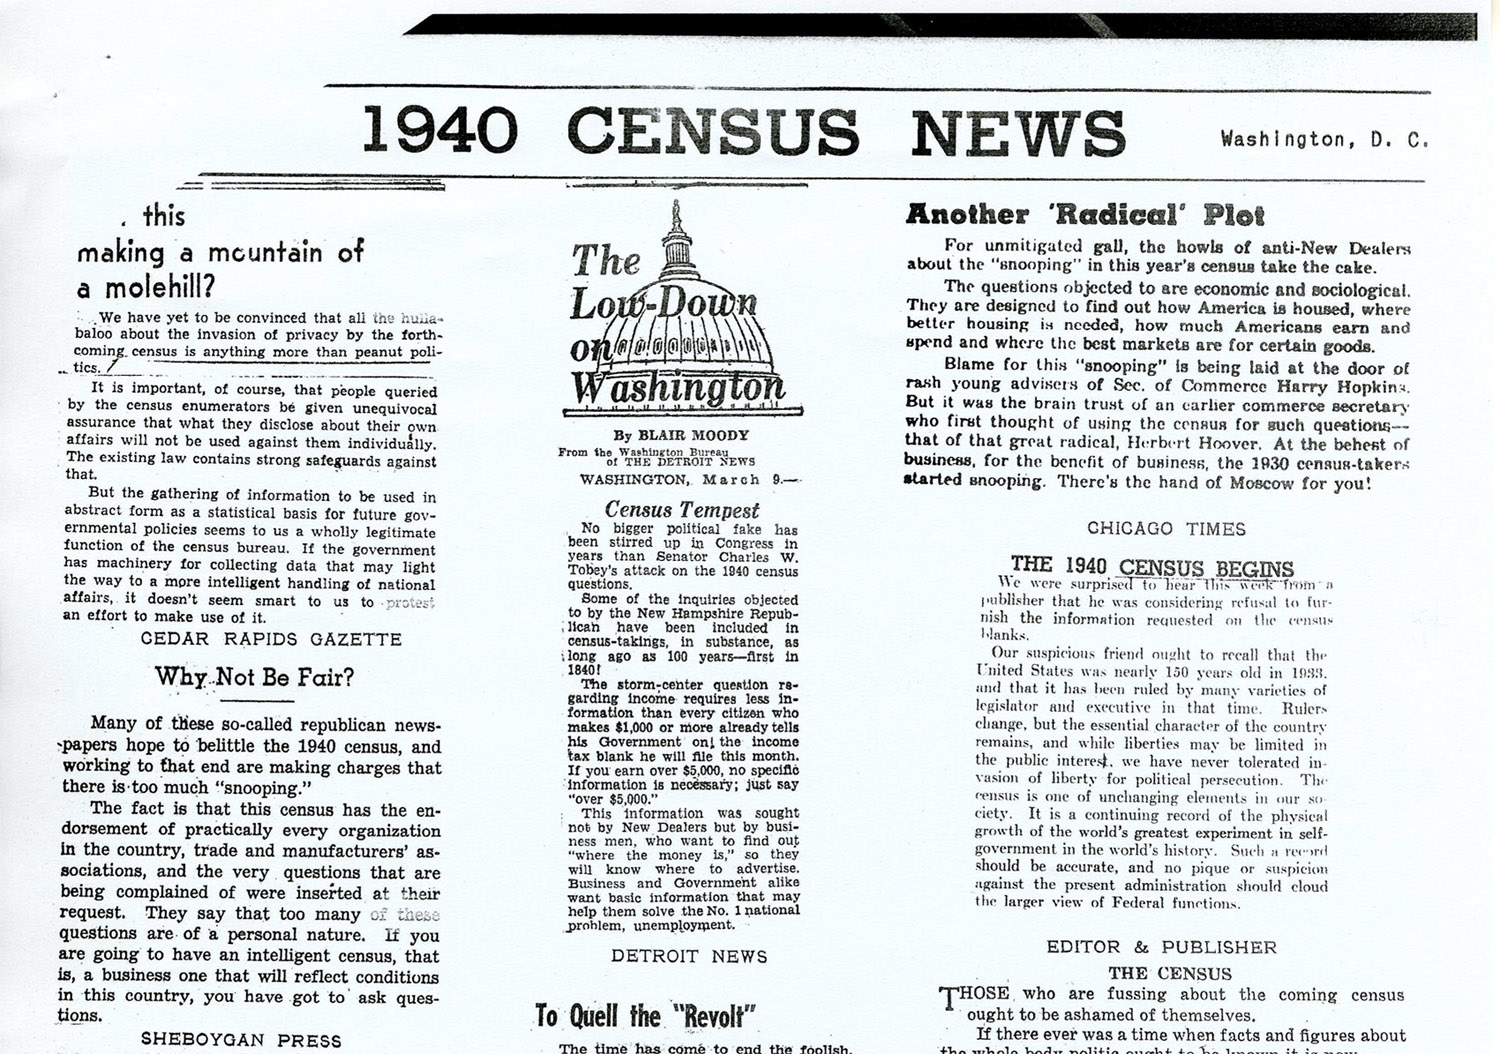 A Census Bureau news clipping reveals a sampling of the controversies surrounding the 1940 census